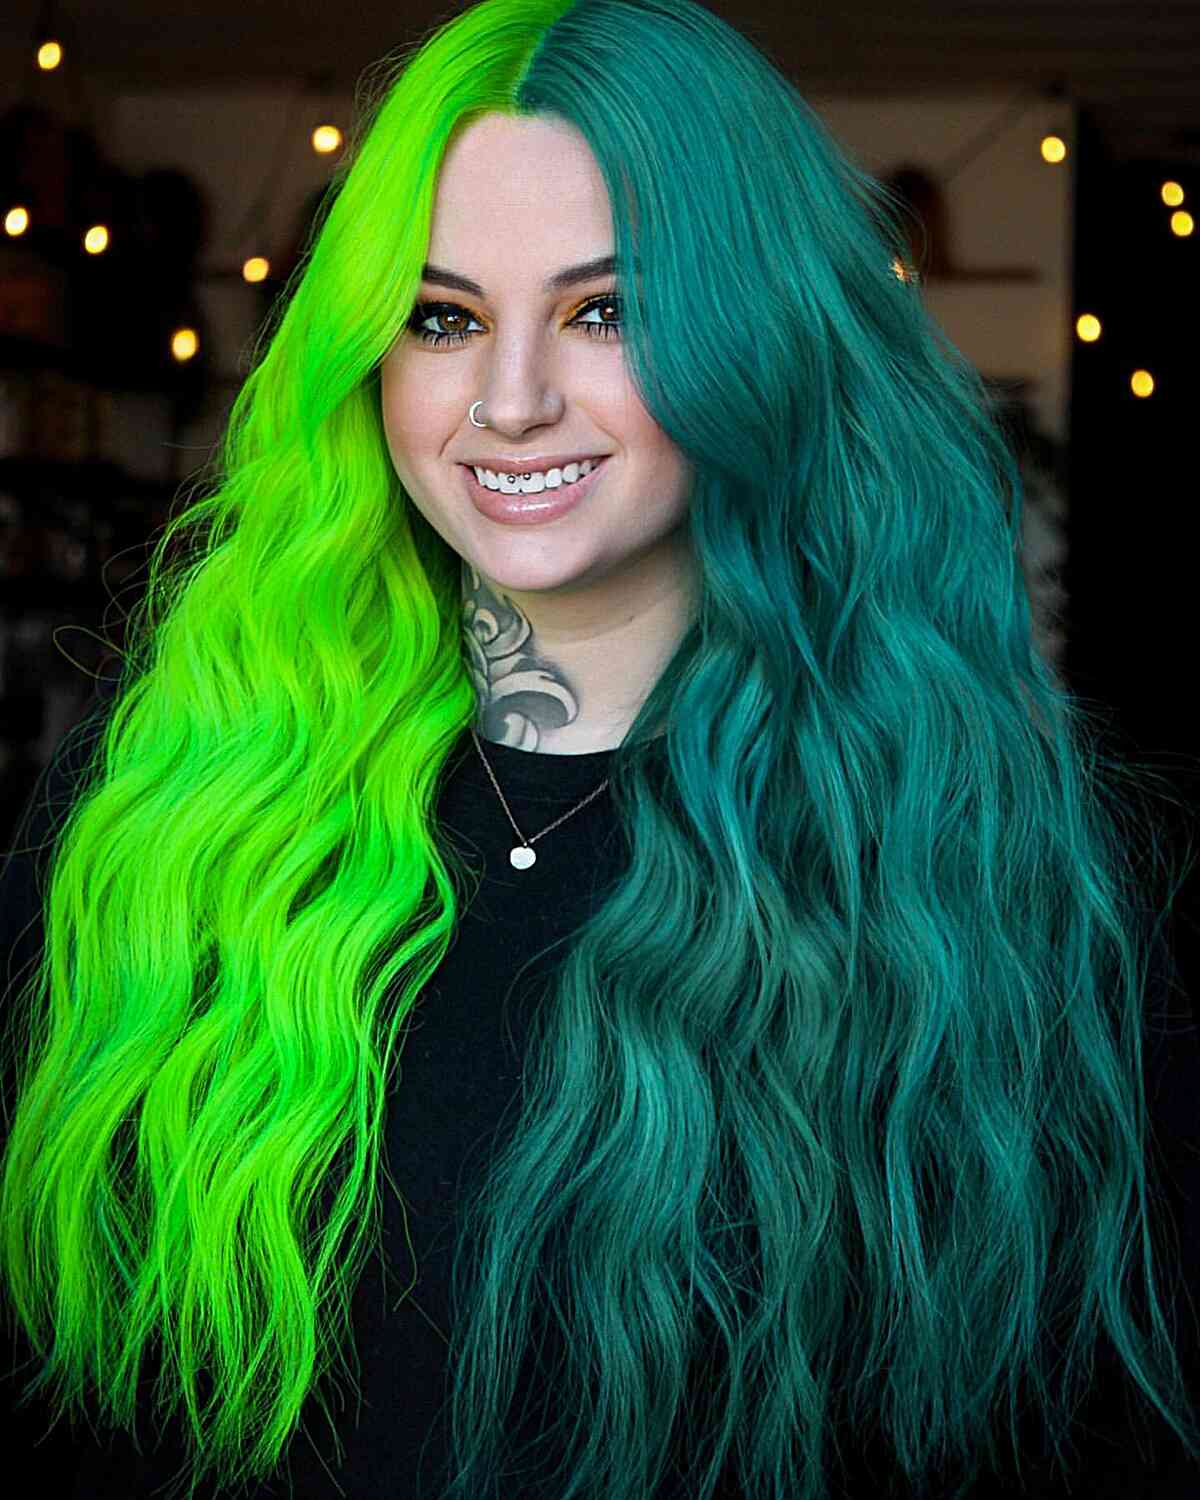 Long, Thick Hair Split Halfway in Neon Green and Teal